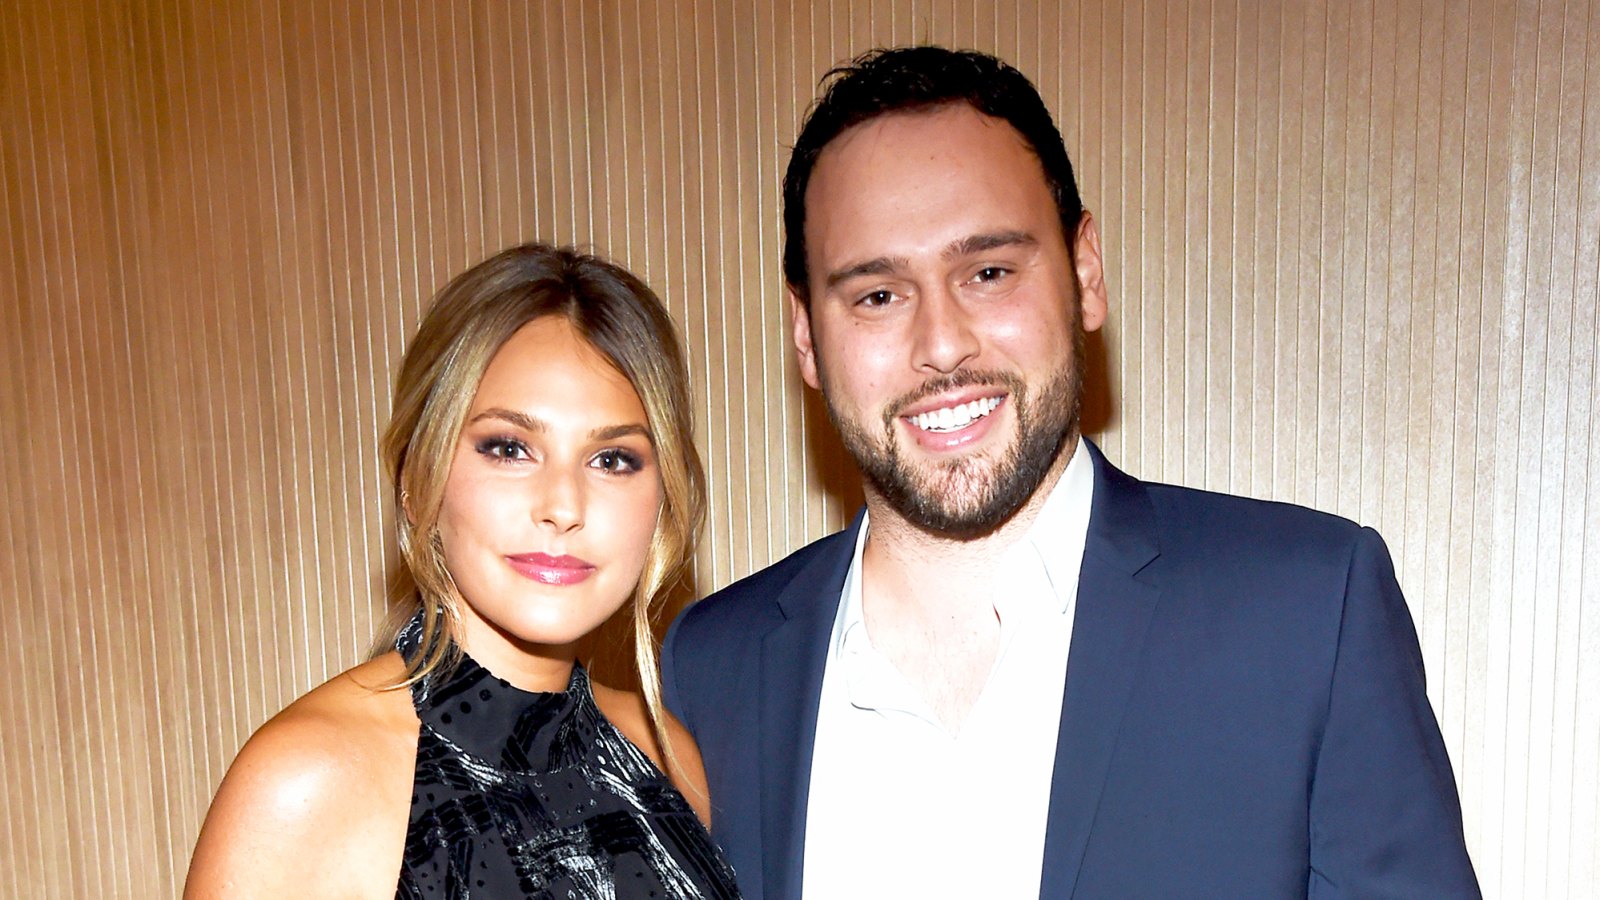 Yael Cohen and Scooter Braun attend Pre-Grammy 2017 Gala and Salute to Industry Icons Honoring Debra Lee at The Beverly Hilton in Los Angeles, California.